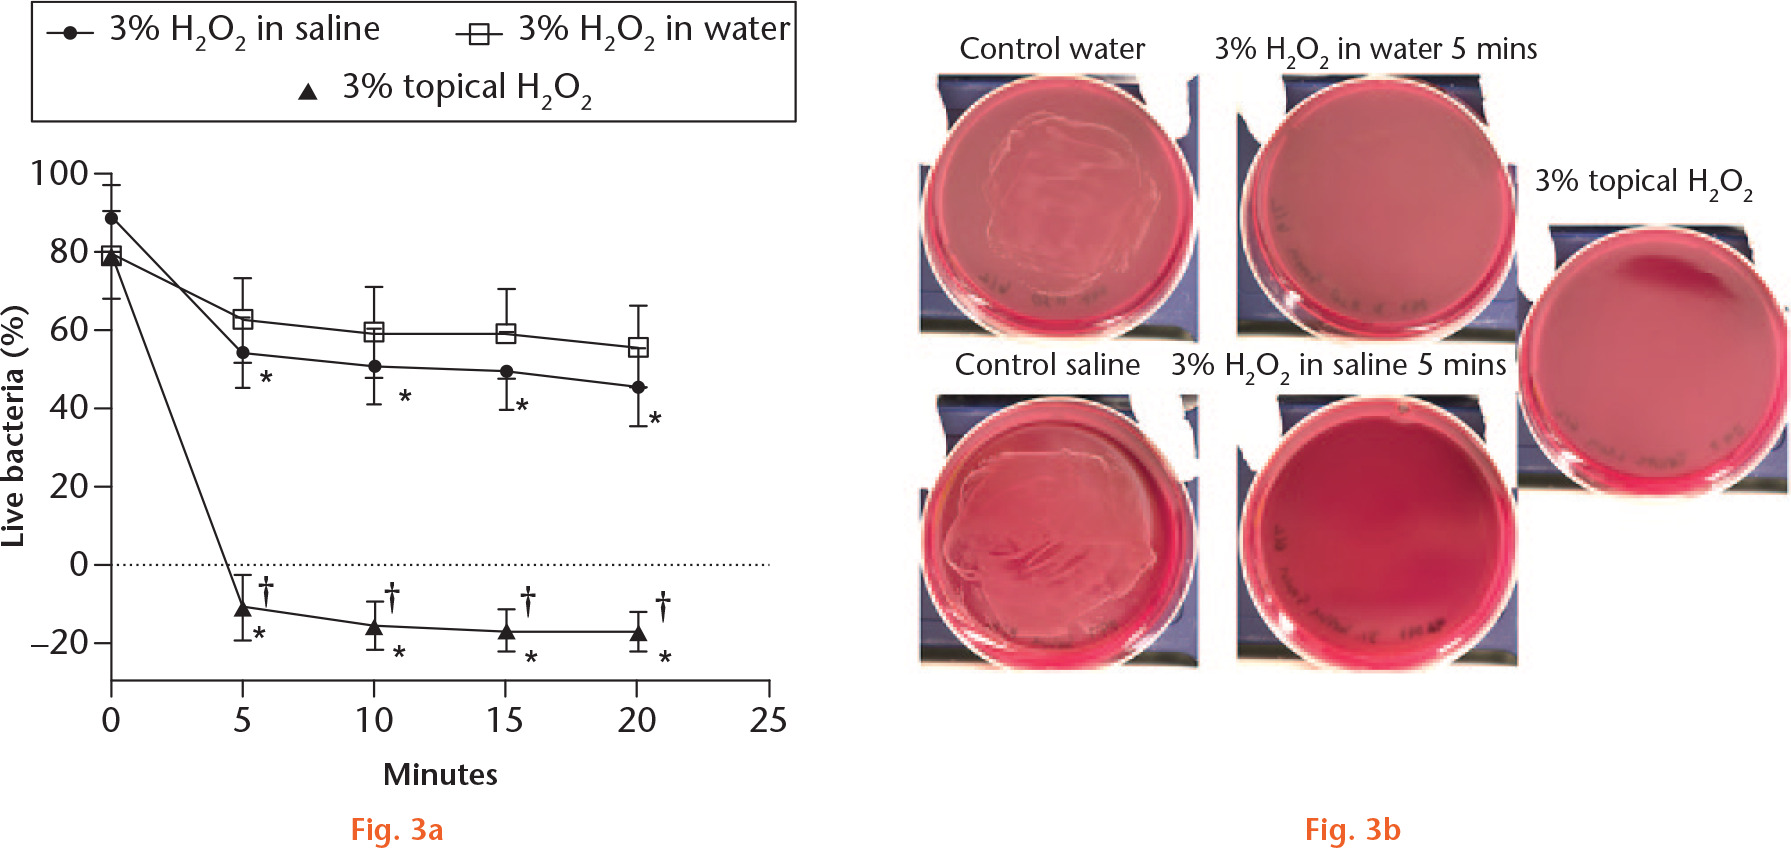  
          Time course of H2O2 effect. a) Bacteria grown in tryptic soy broth (TSB) showed that a 3% topical solution is superior to the other solutions in its bactericidal effect, starting from five minutes of incubation. 3% H2O2 prepared in saline is not significantly different from 3% H2O2 prepared in water in any of the timepoints. *p < 0.0001 compared with control saline or water; †p < 0.0001 compared with 3% H2O2 prepared in saline or in water. b) Bacteria grown in tryptic soy broth–defibrinated sheep blood (TSB-DSB) agar and treated with each solution of H2O2 for five minutes was grown as lawn to further assess for growth inhibition. All treatment solutions inhibited bacterial growth except the controls with water or saline.
        